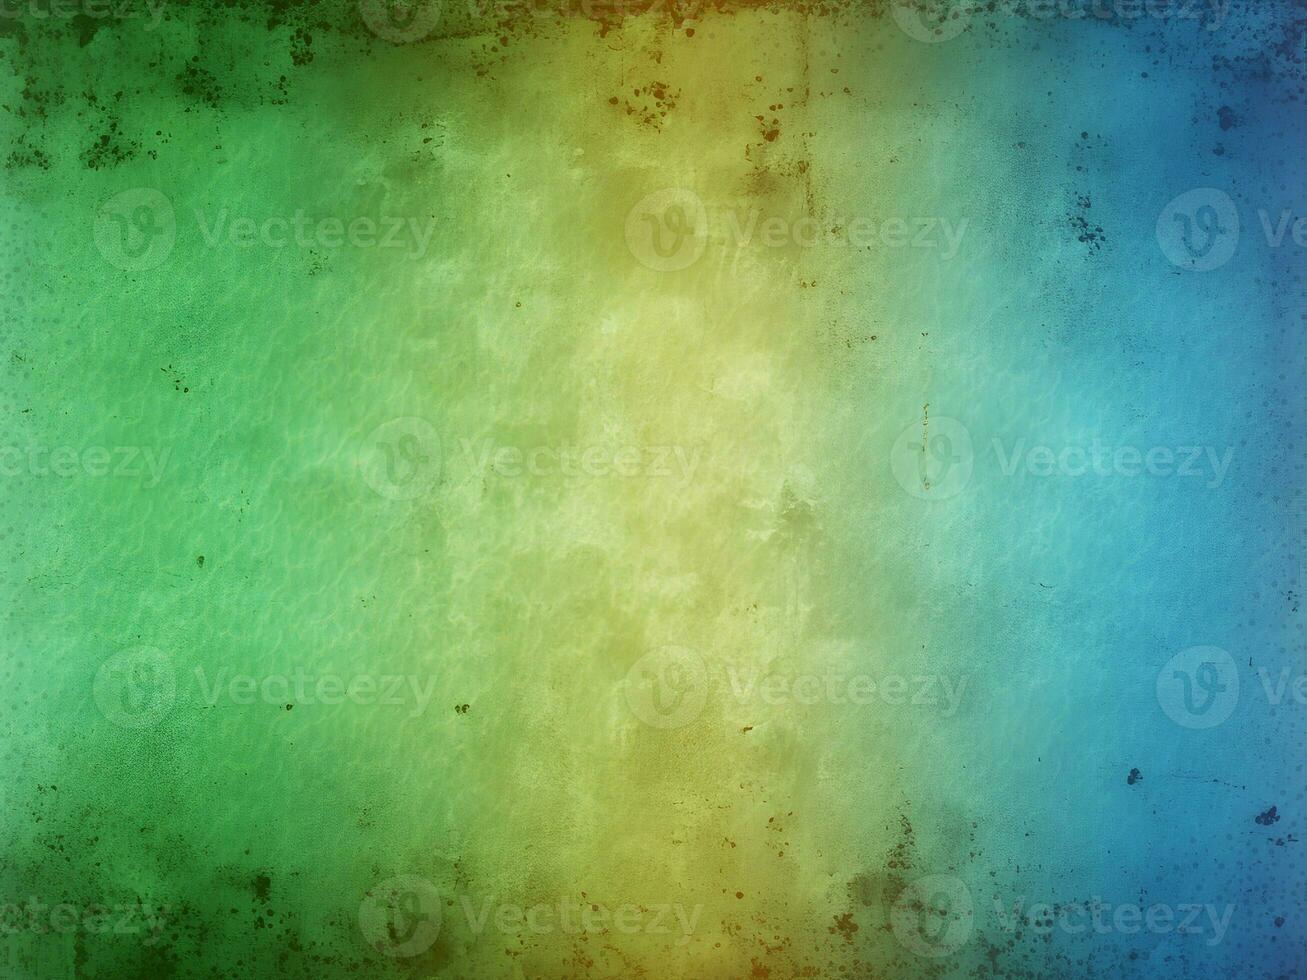 Grunge blue and green background photo